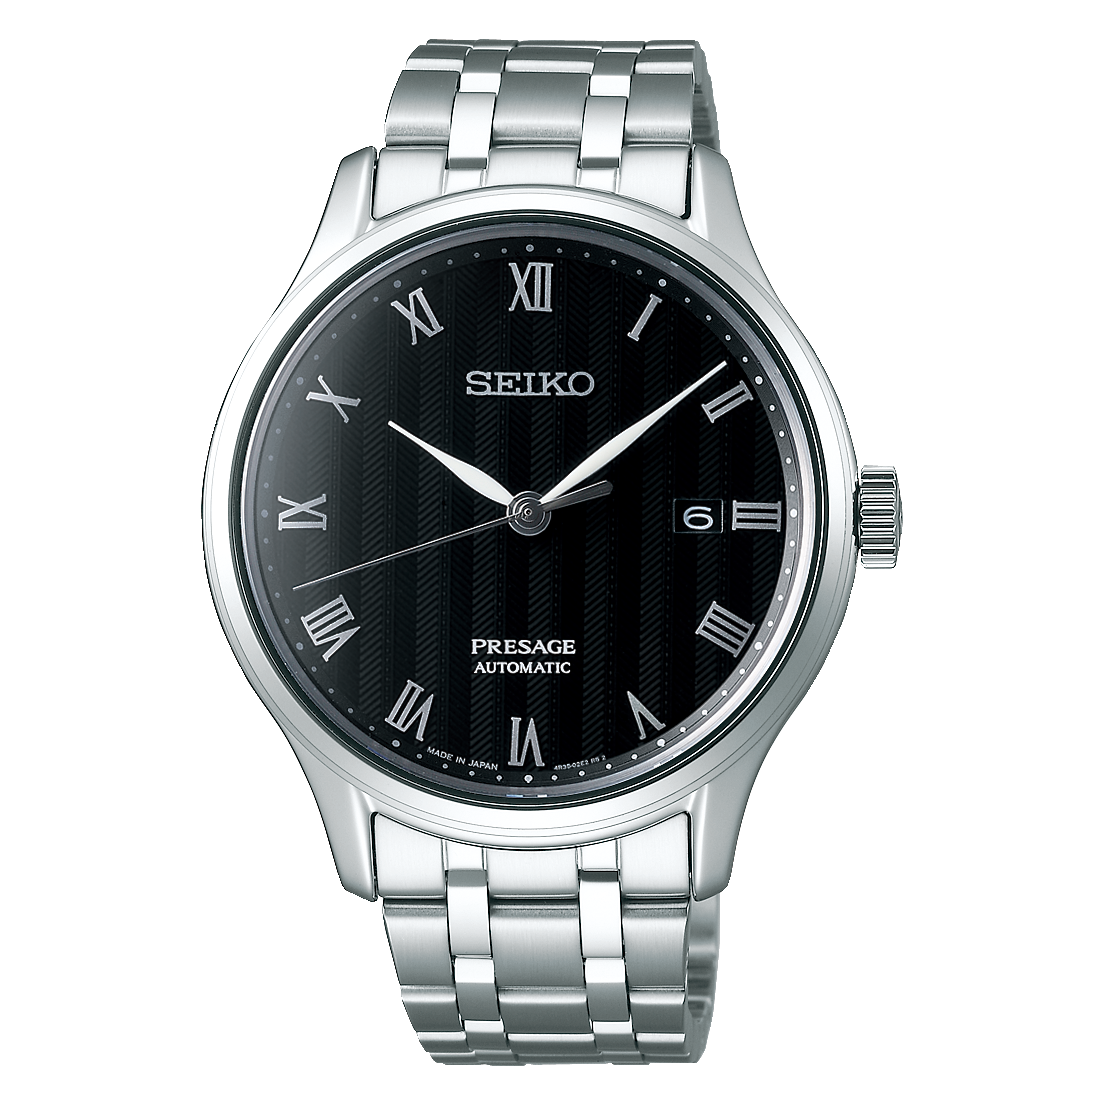  Seiko Presage Men's Automatic Black Dial Stainless Steel Watch srpc81j1